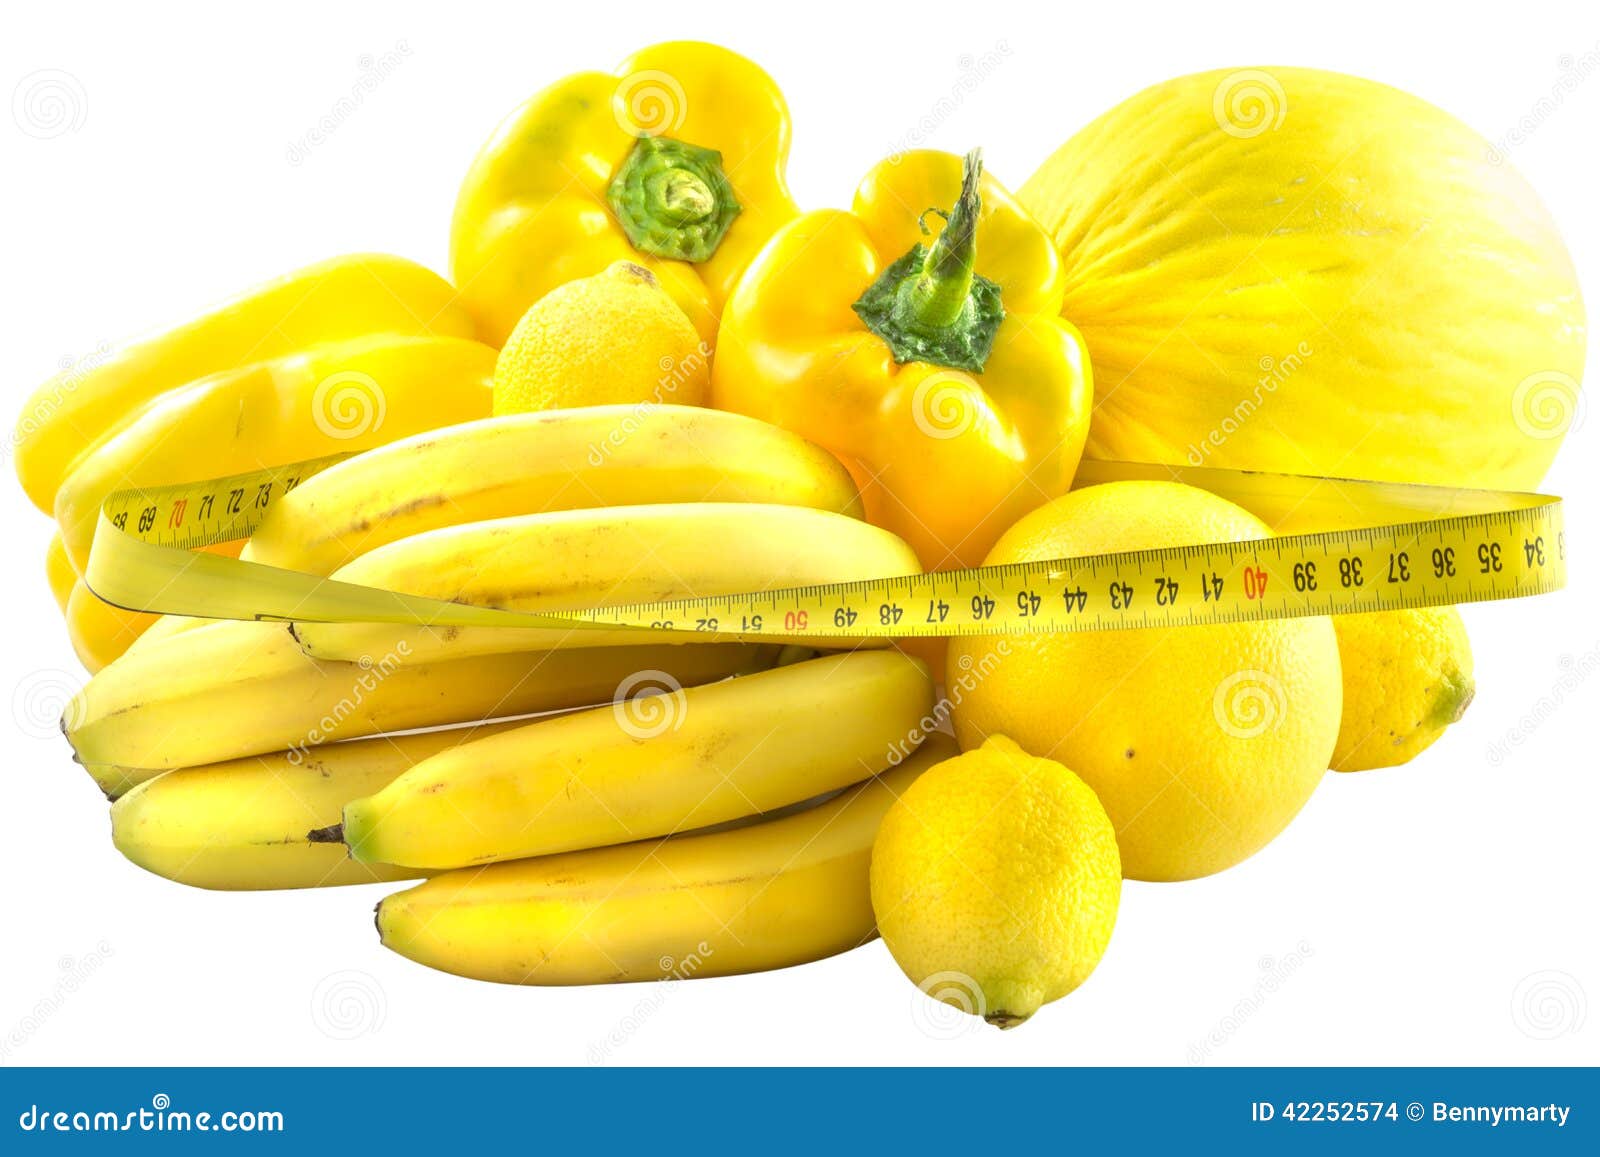 Yellow Fruit And Vegetables With Measuring Tape Stock Photo - Image ...